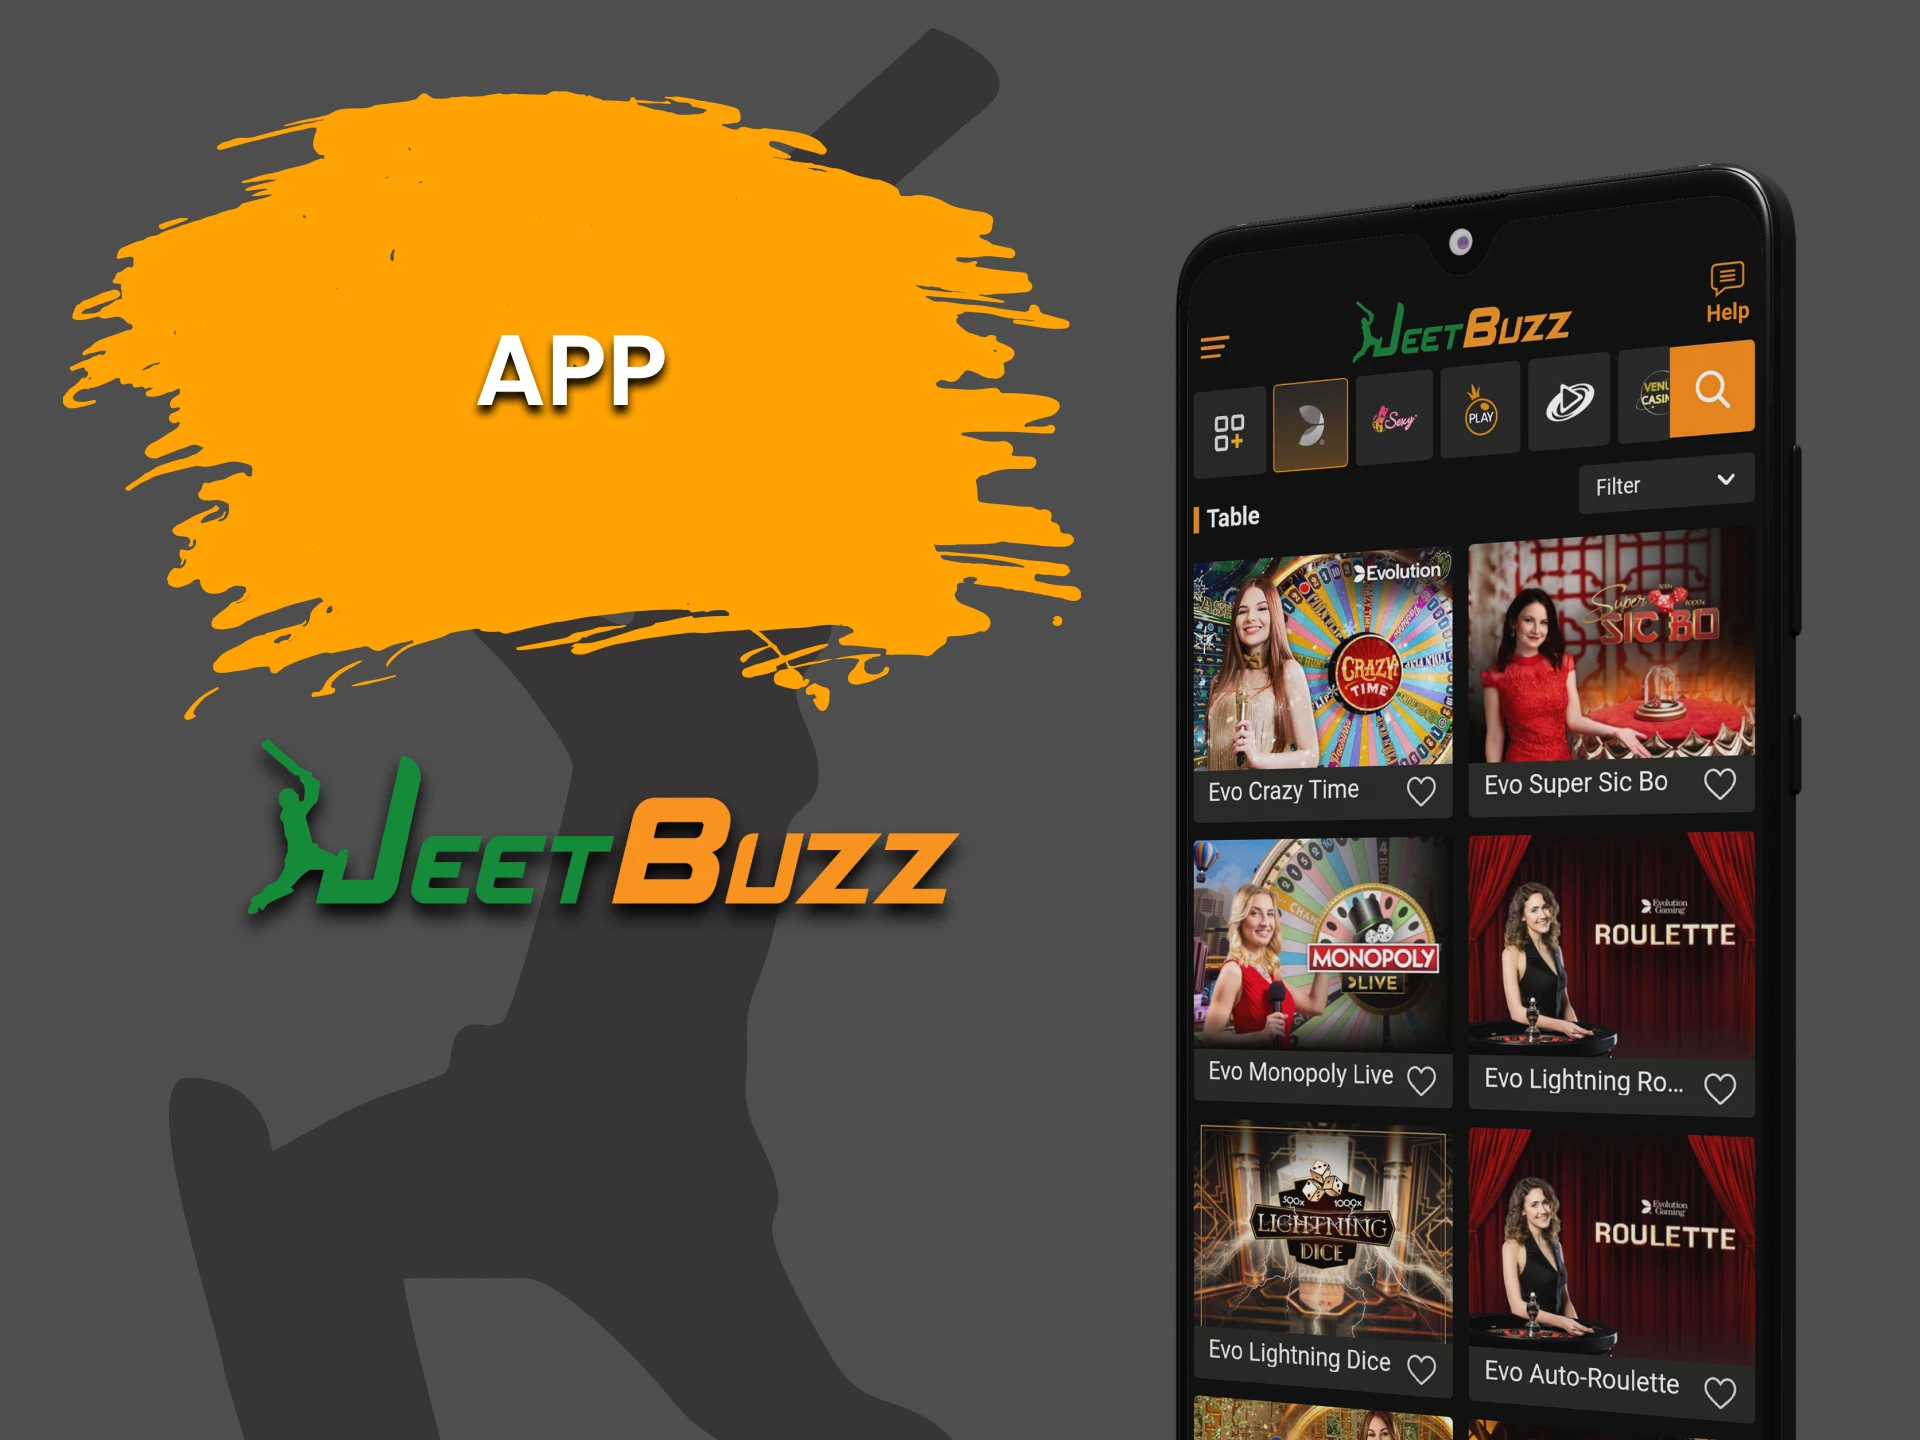 You can play Game Show through the Jeetbuzz app.